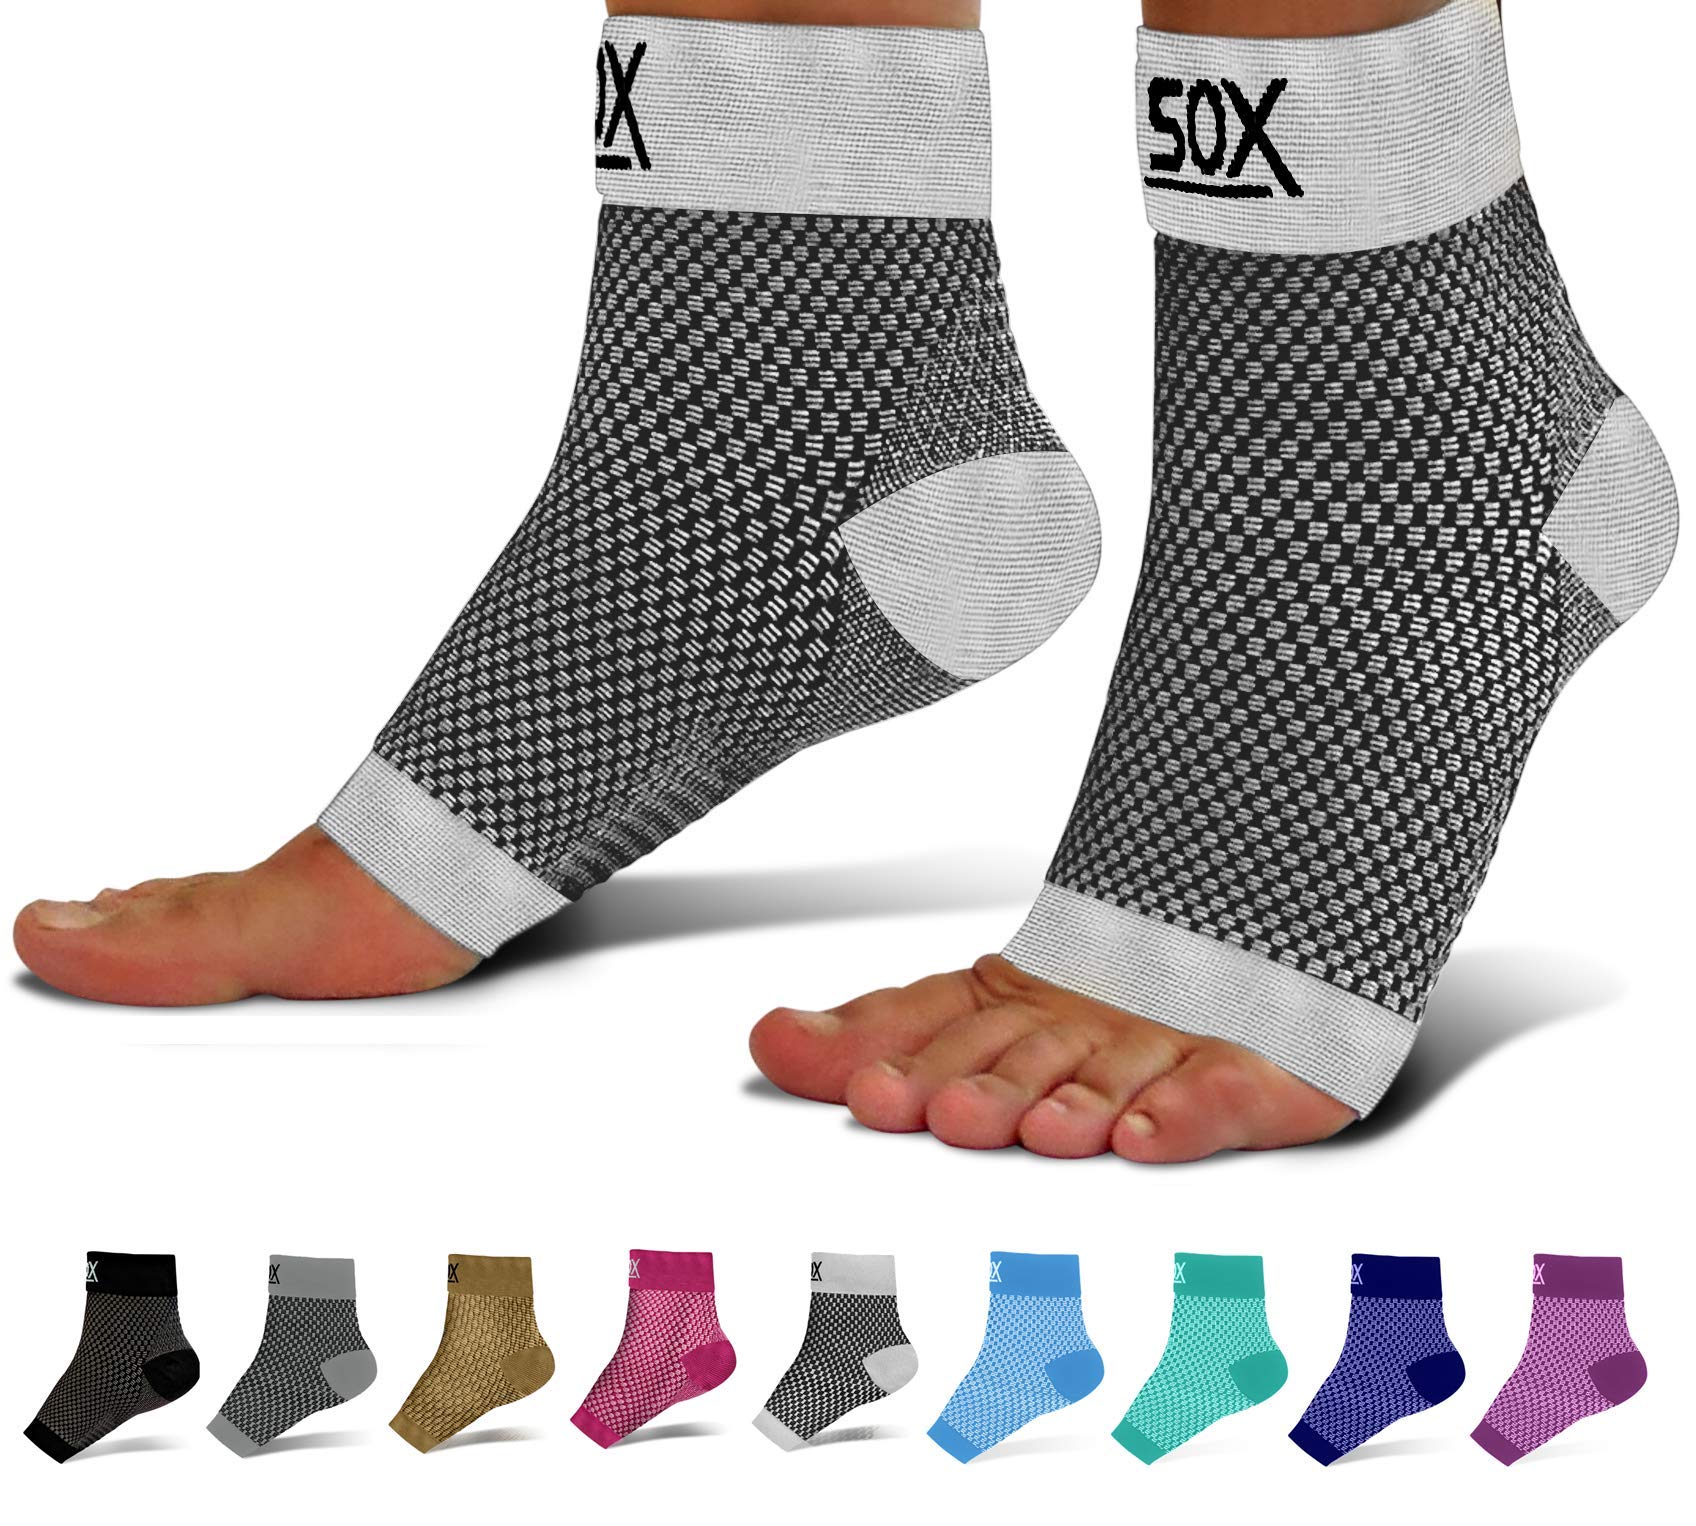 SB SOX Plantar Fasciitis Relief Socks (1 Pair) for Women & Men - Best Compression Sleeves for All Day Wear with Foot/Arch Support for Pain Relief (White, Medium)